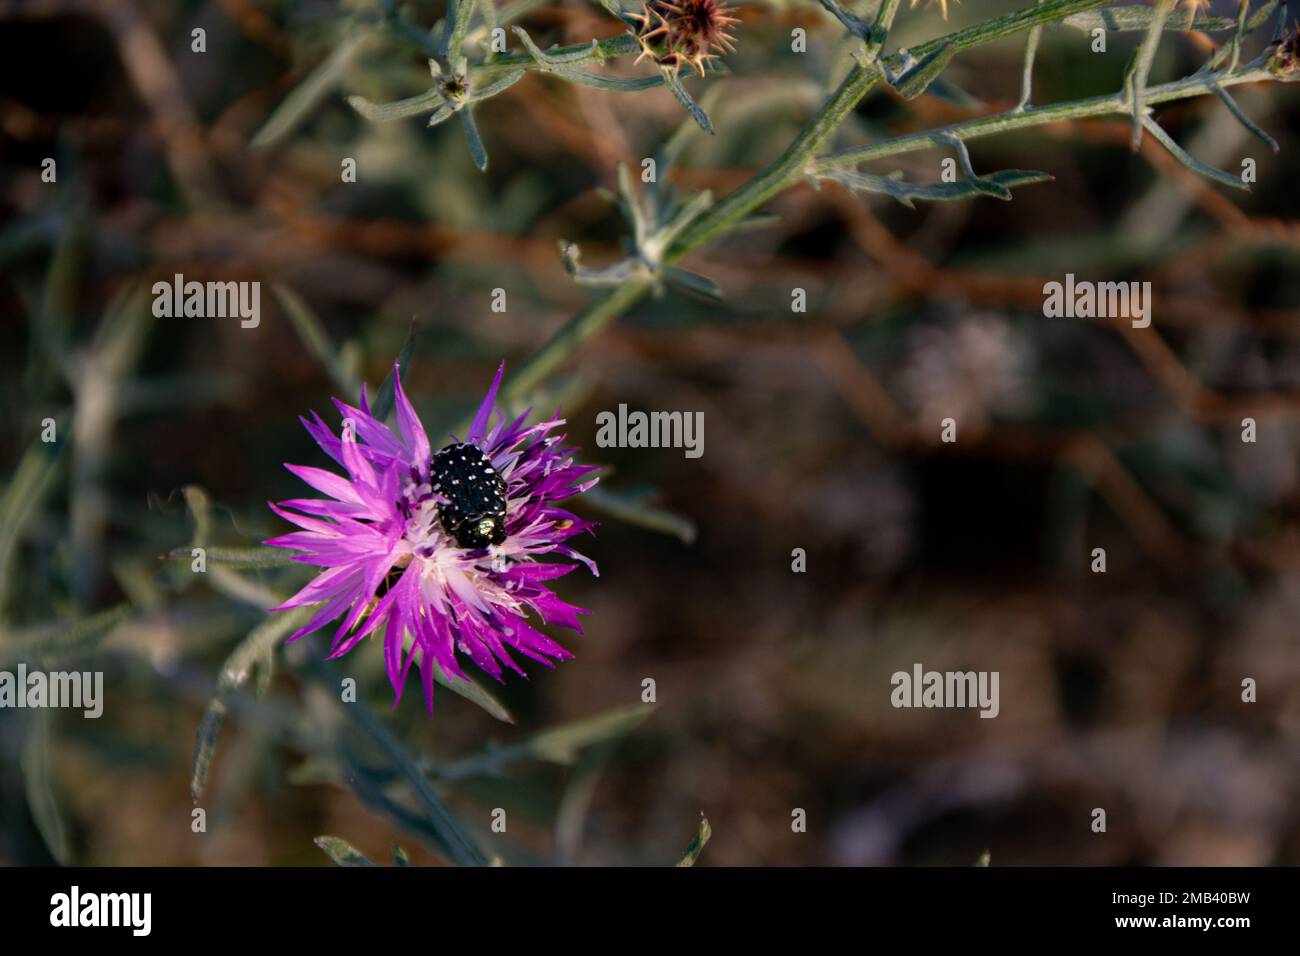 A white spotted rose beetle on a purple milk thistle flower. Stock Photo